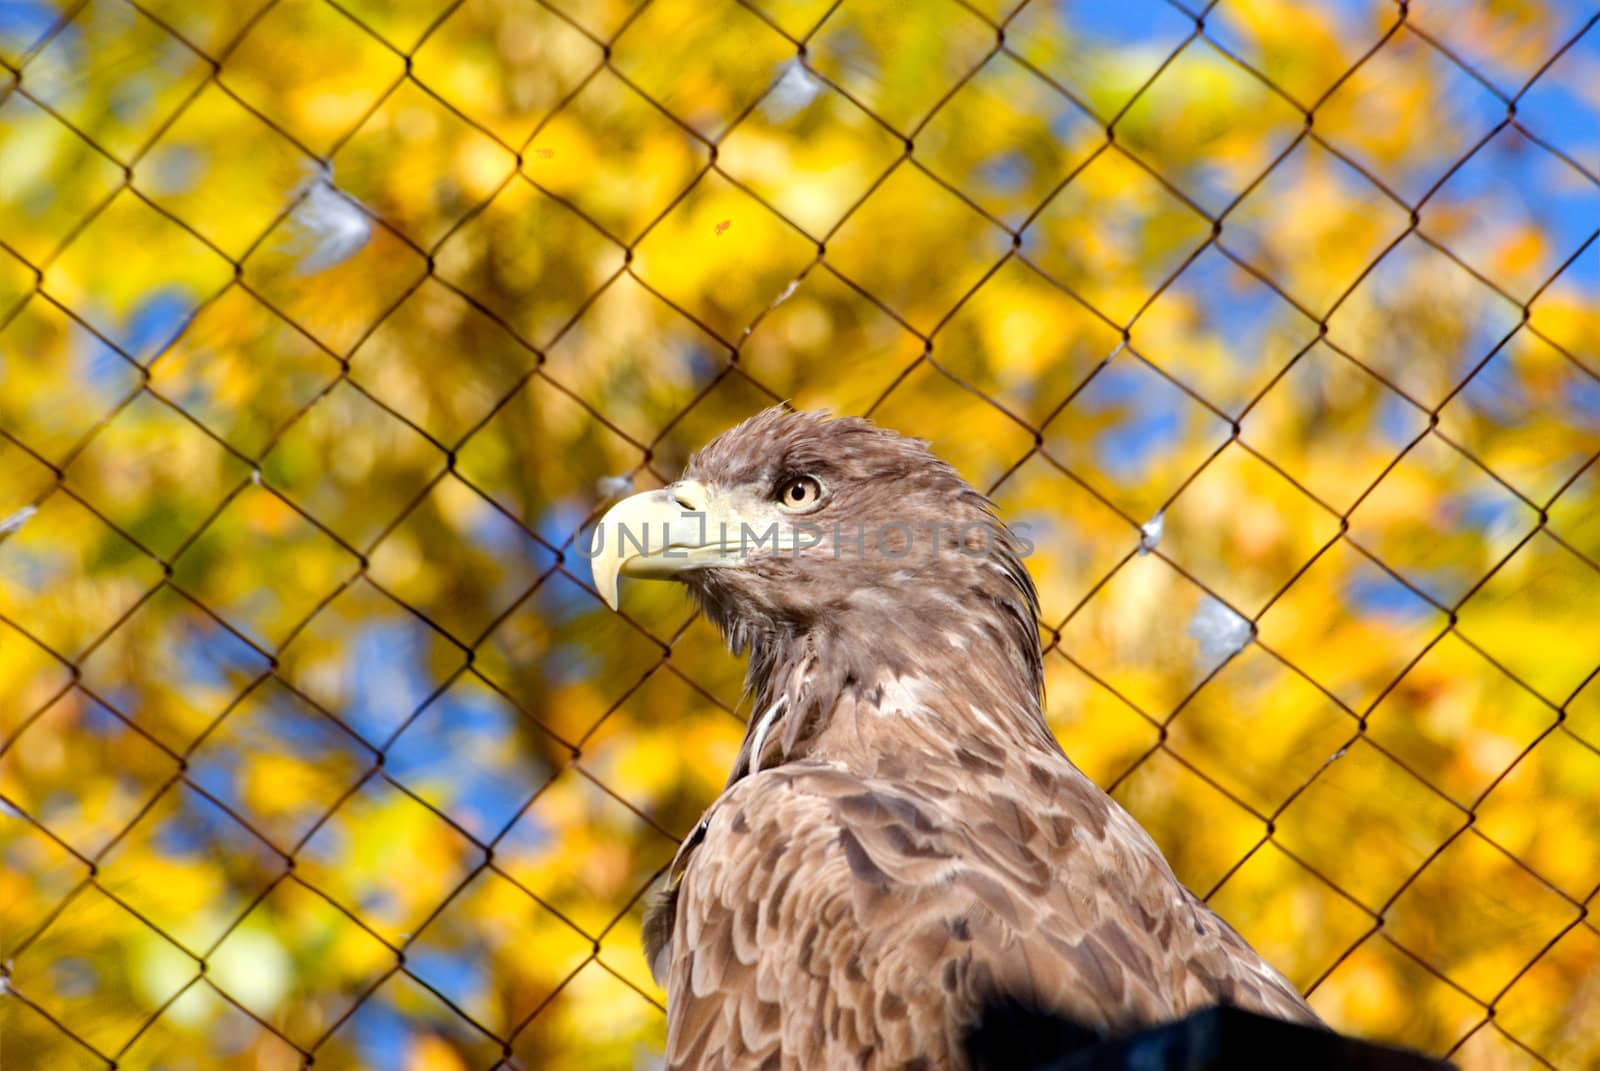 White-tailed (sea) eagle sits in a cage in a zoo on a background of yellow leaves
